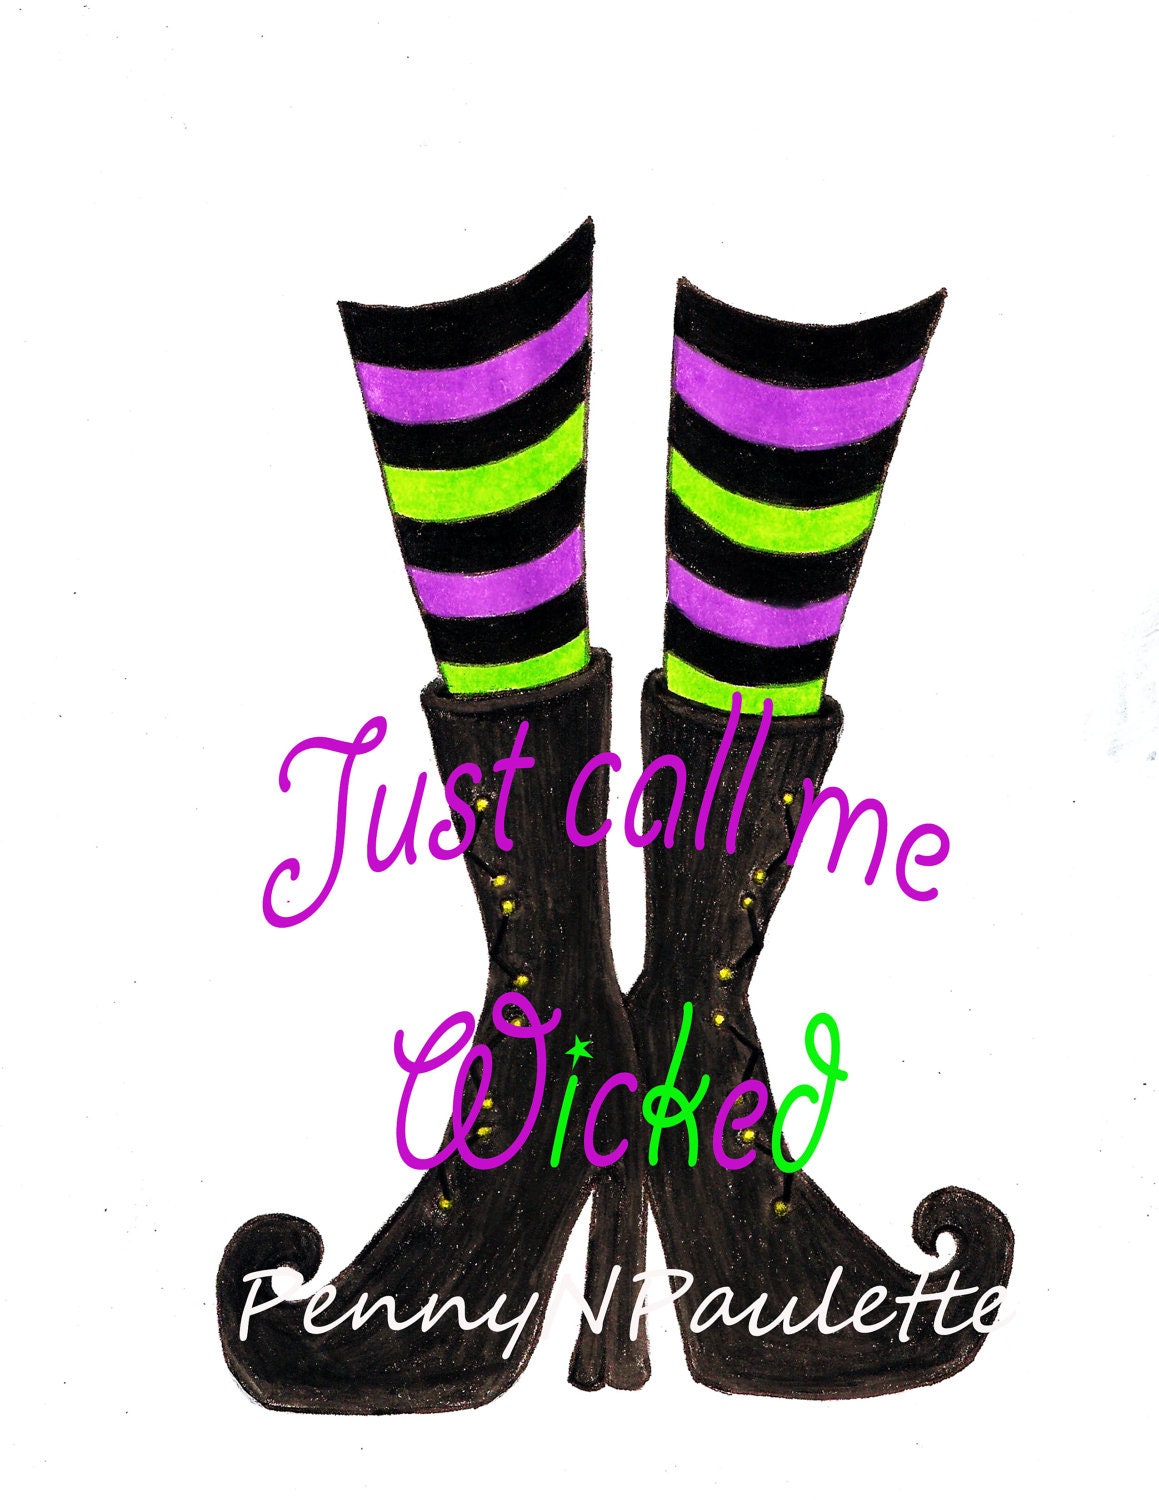 childrens babies Halloween "Just call me wicked" printed tshirt custom made to order sizes 0-5T OOAK original hand drawn designs